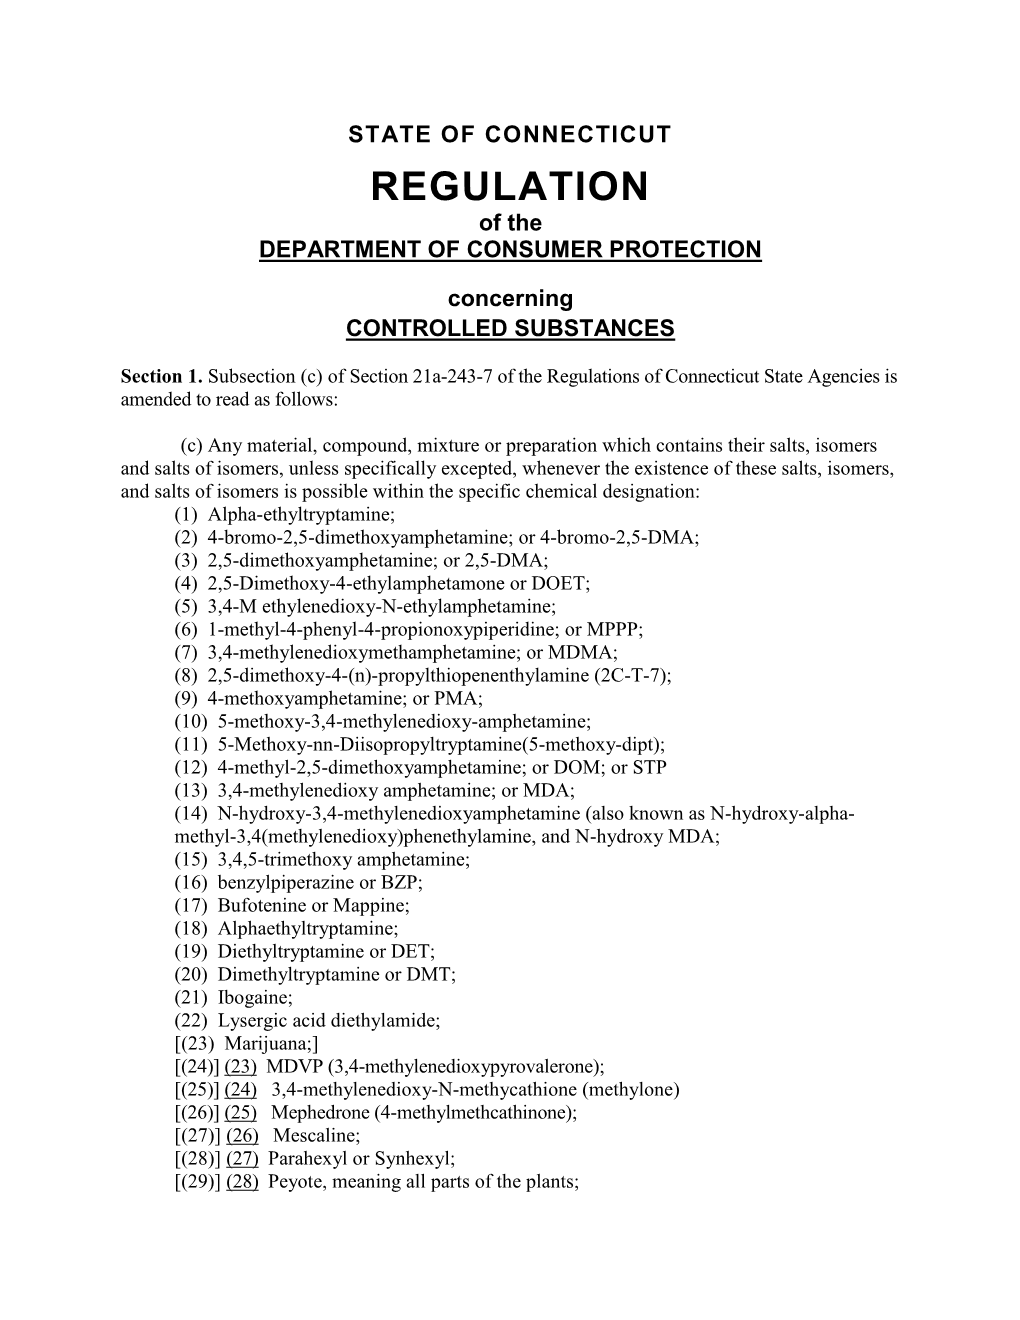 REGULATION of the DEPARTMENT of CONSUMER PROTECTION